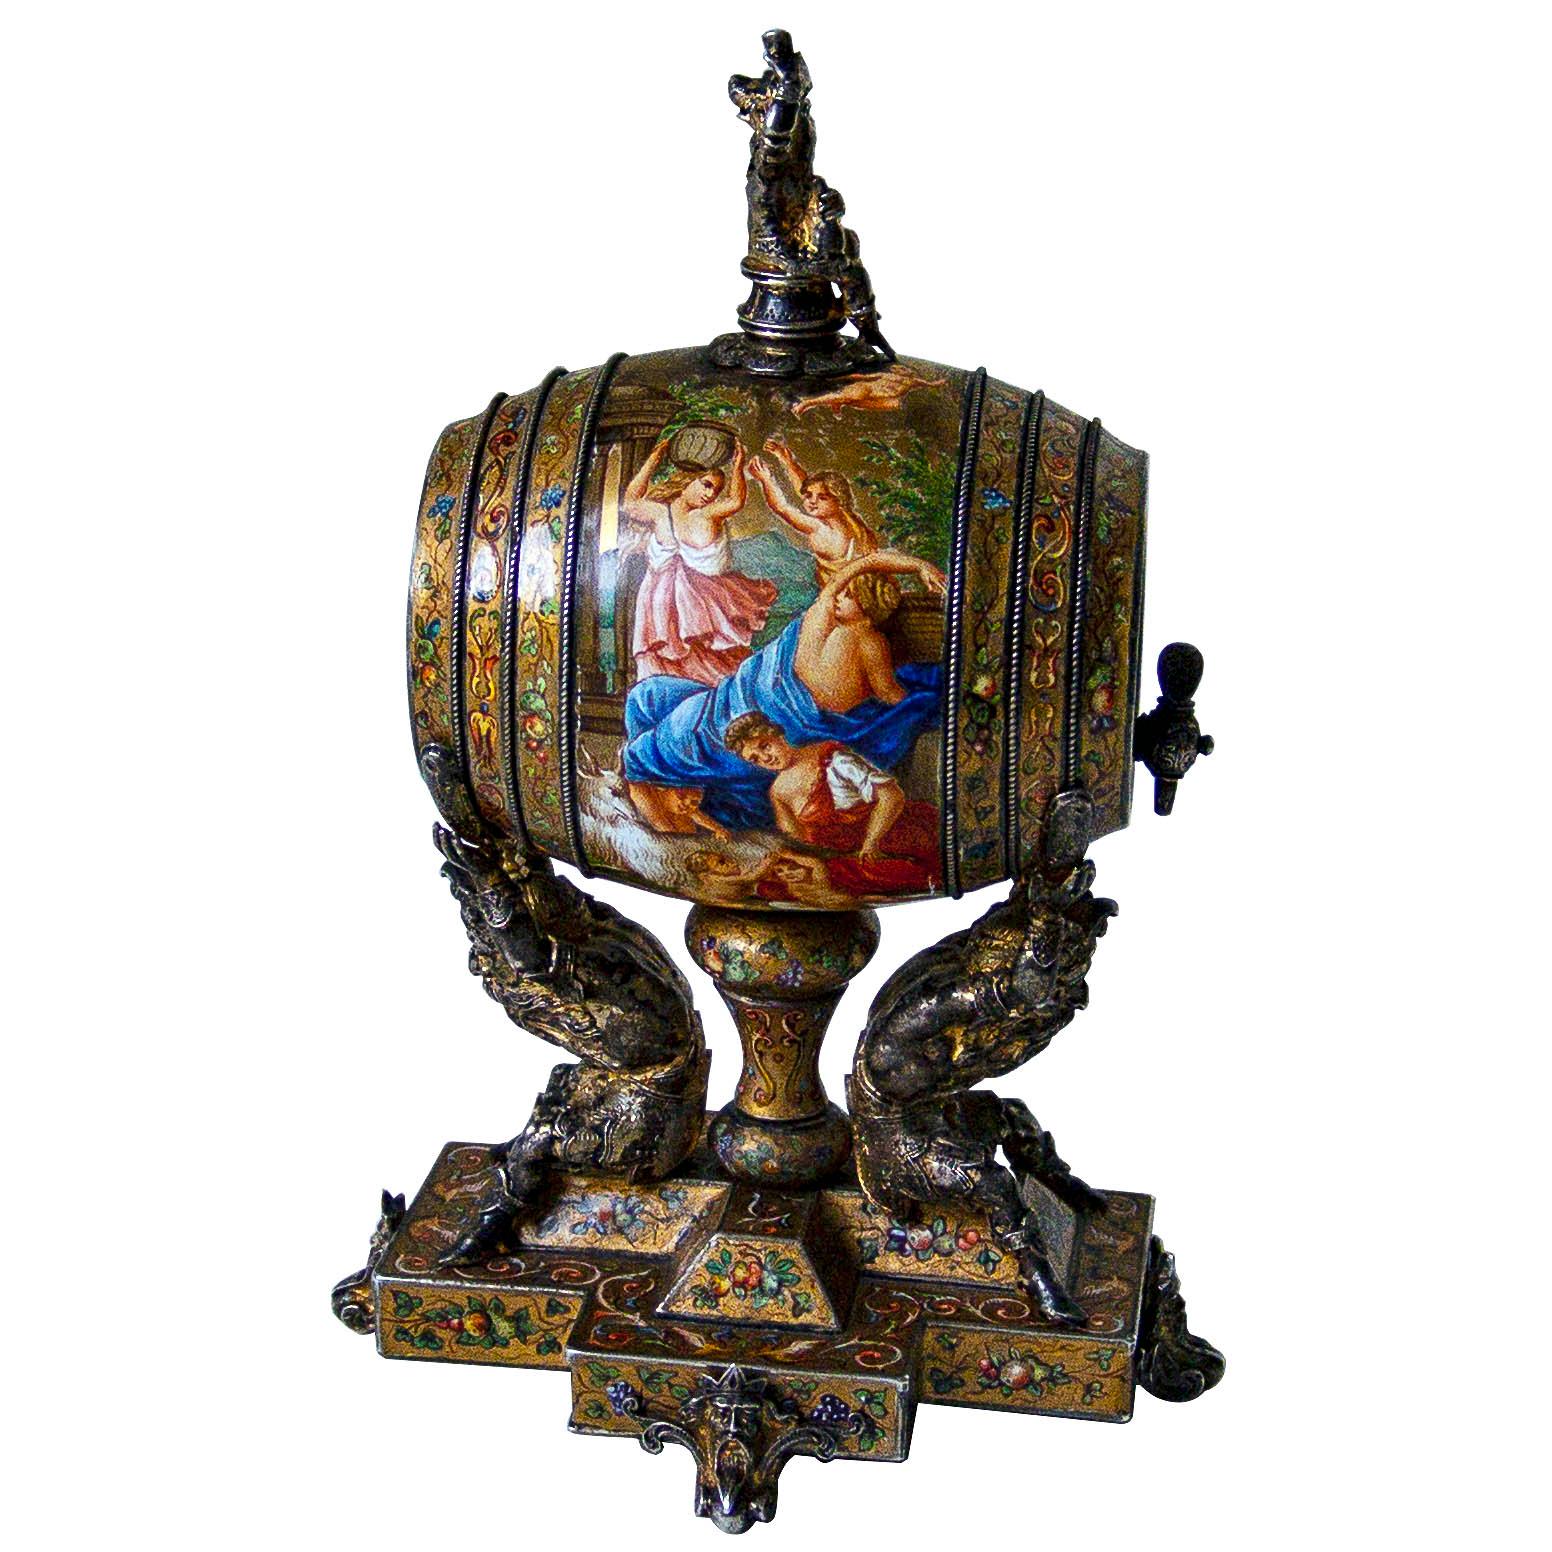 A beautifully enameled silver 'wine barrel' supported by the raised hands of two figures of Bacchus seated back to back either side of a central mount set on a stepped cruciform base which in turn is supported by four Bacchus mask feet. The barrel